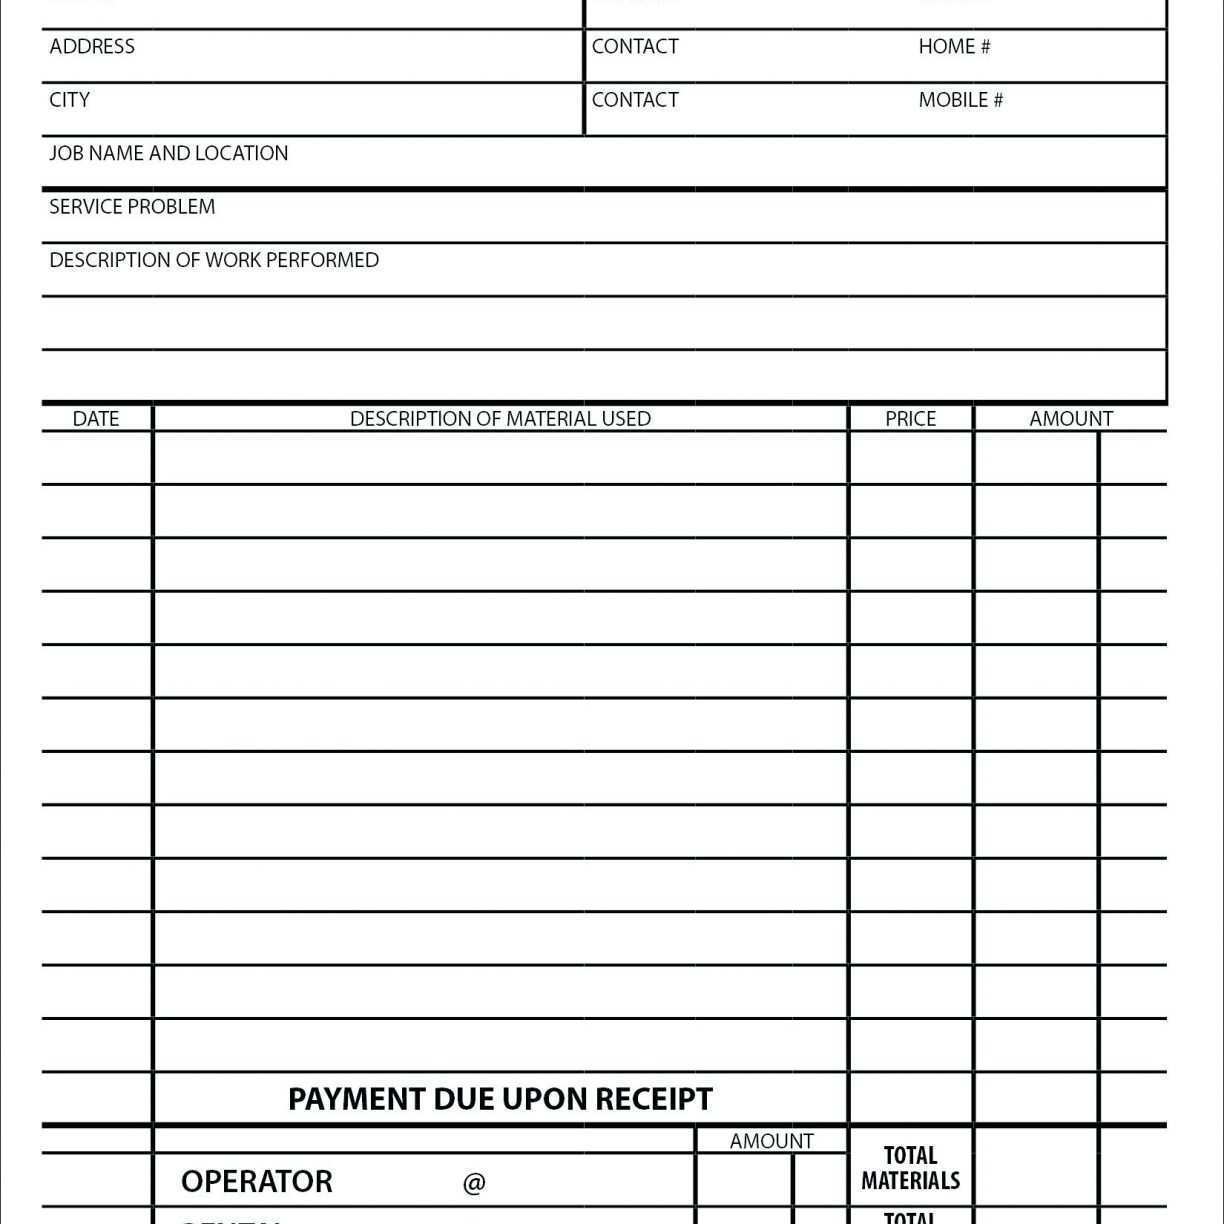 56-report-construction-time-and-materials-invoice-template-now-for